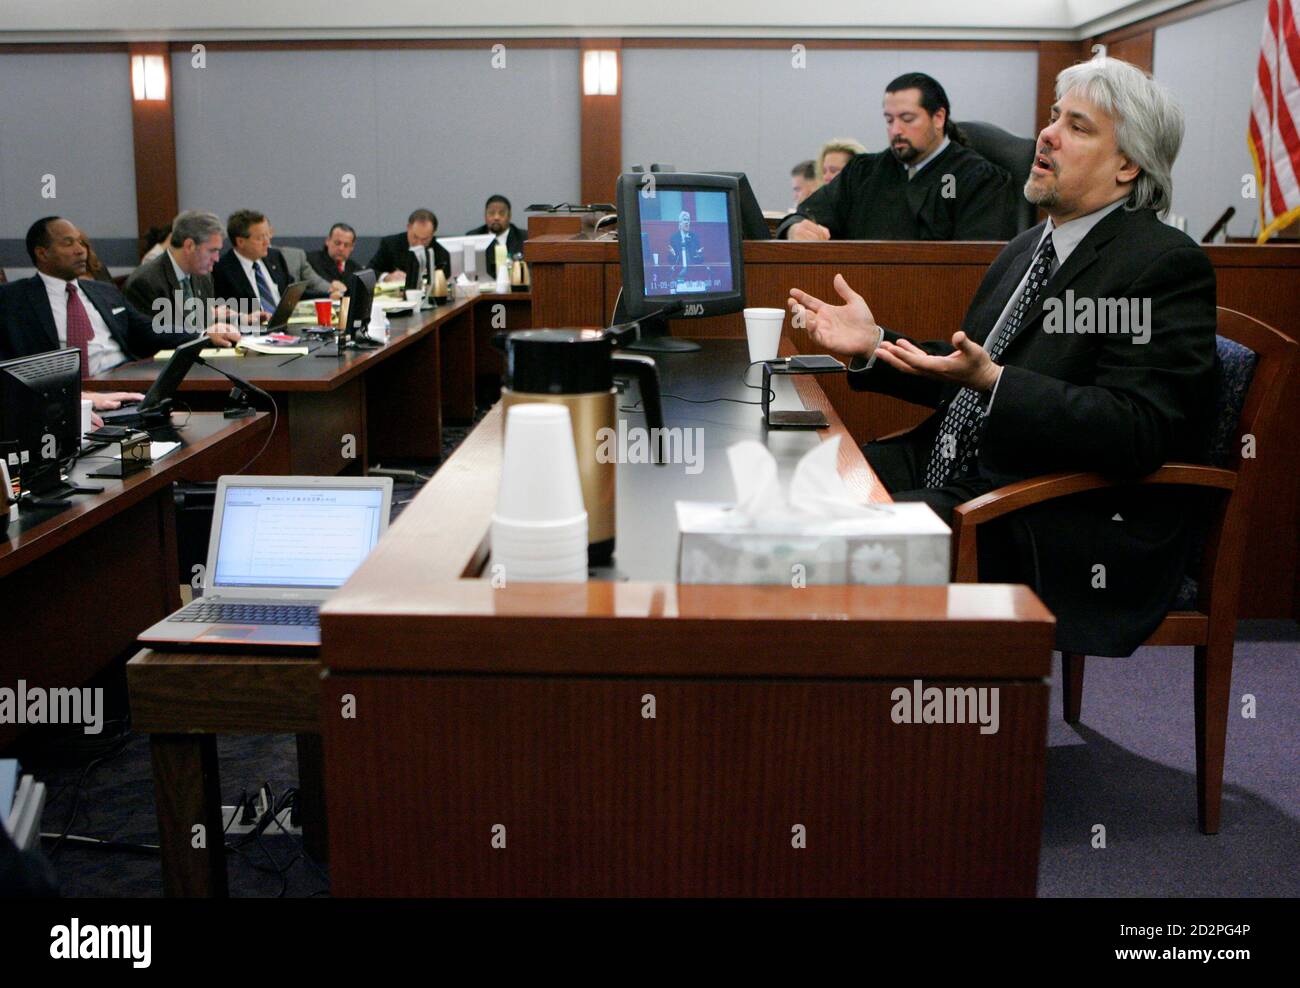 Thomas Riccio testifies during the second day of O.J. Simpson's preliminary hearing at the Clark County Regional Justice Center in Las Vegas, Nevada November 9, 2007. Simpson is seated at far left.  Simpson never drew a gun during what prosecutors say was an armed robbery of his own sports memorabilia and may not even have seen one brandished during the incident in a Las Vegas hotel room, a witness testified on Friday. REUTERS/Steve Marcus (UNITED STATES) Stock Photo